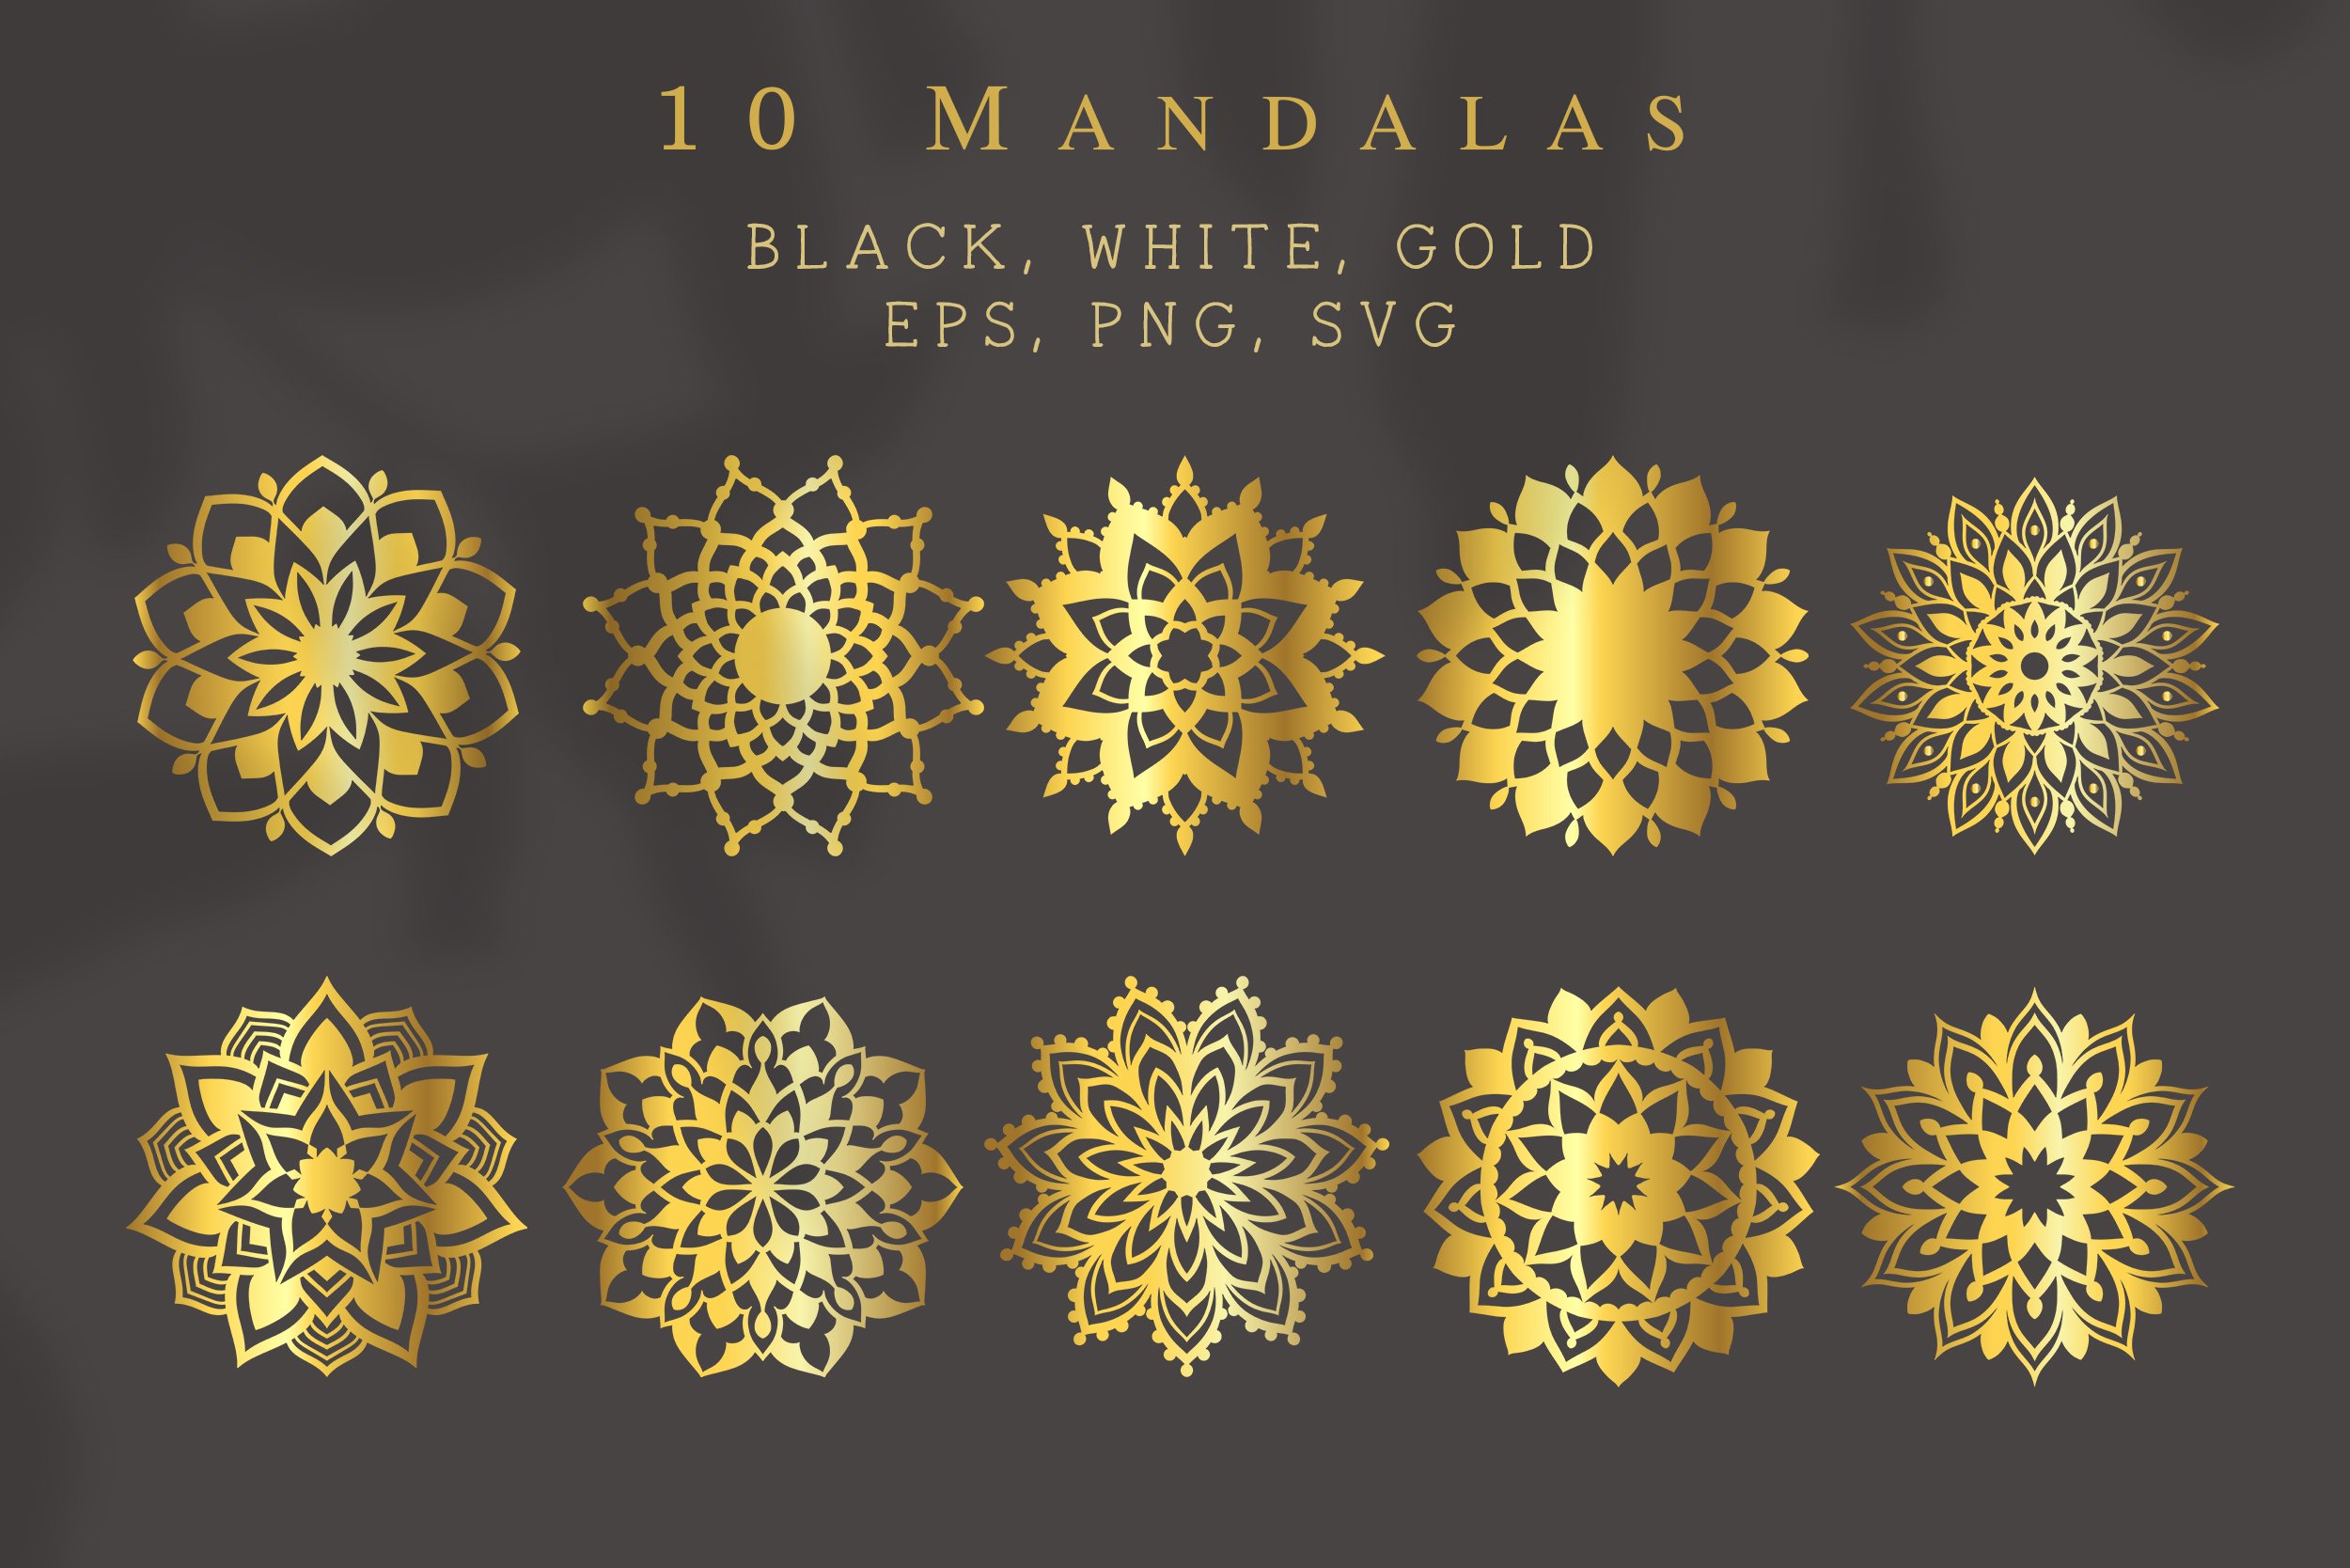 There are 10 mandalas gold elements.